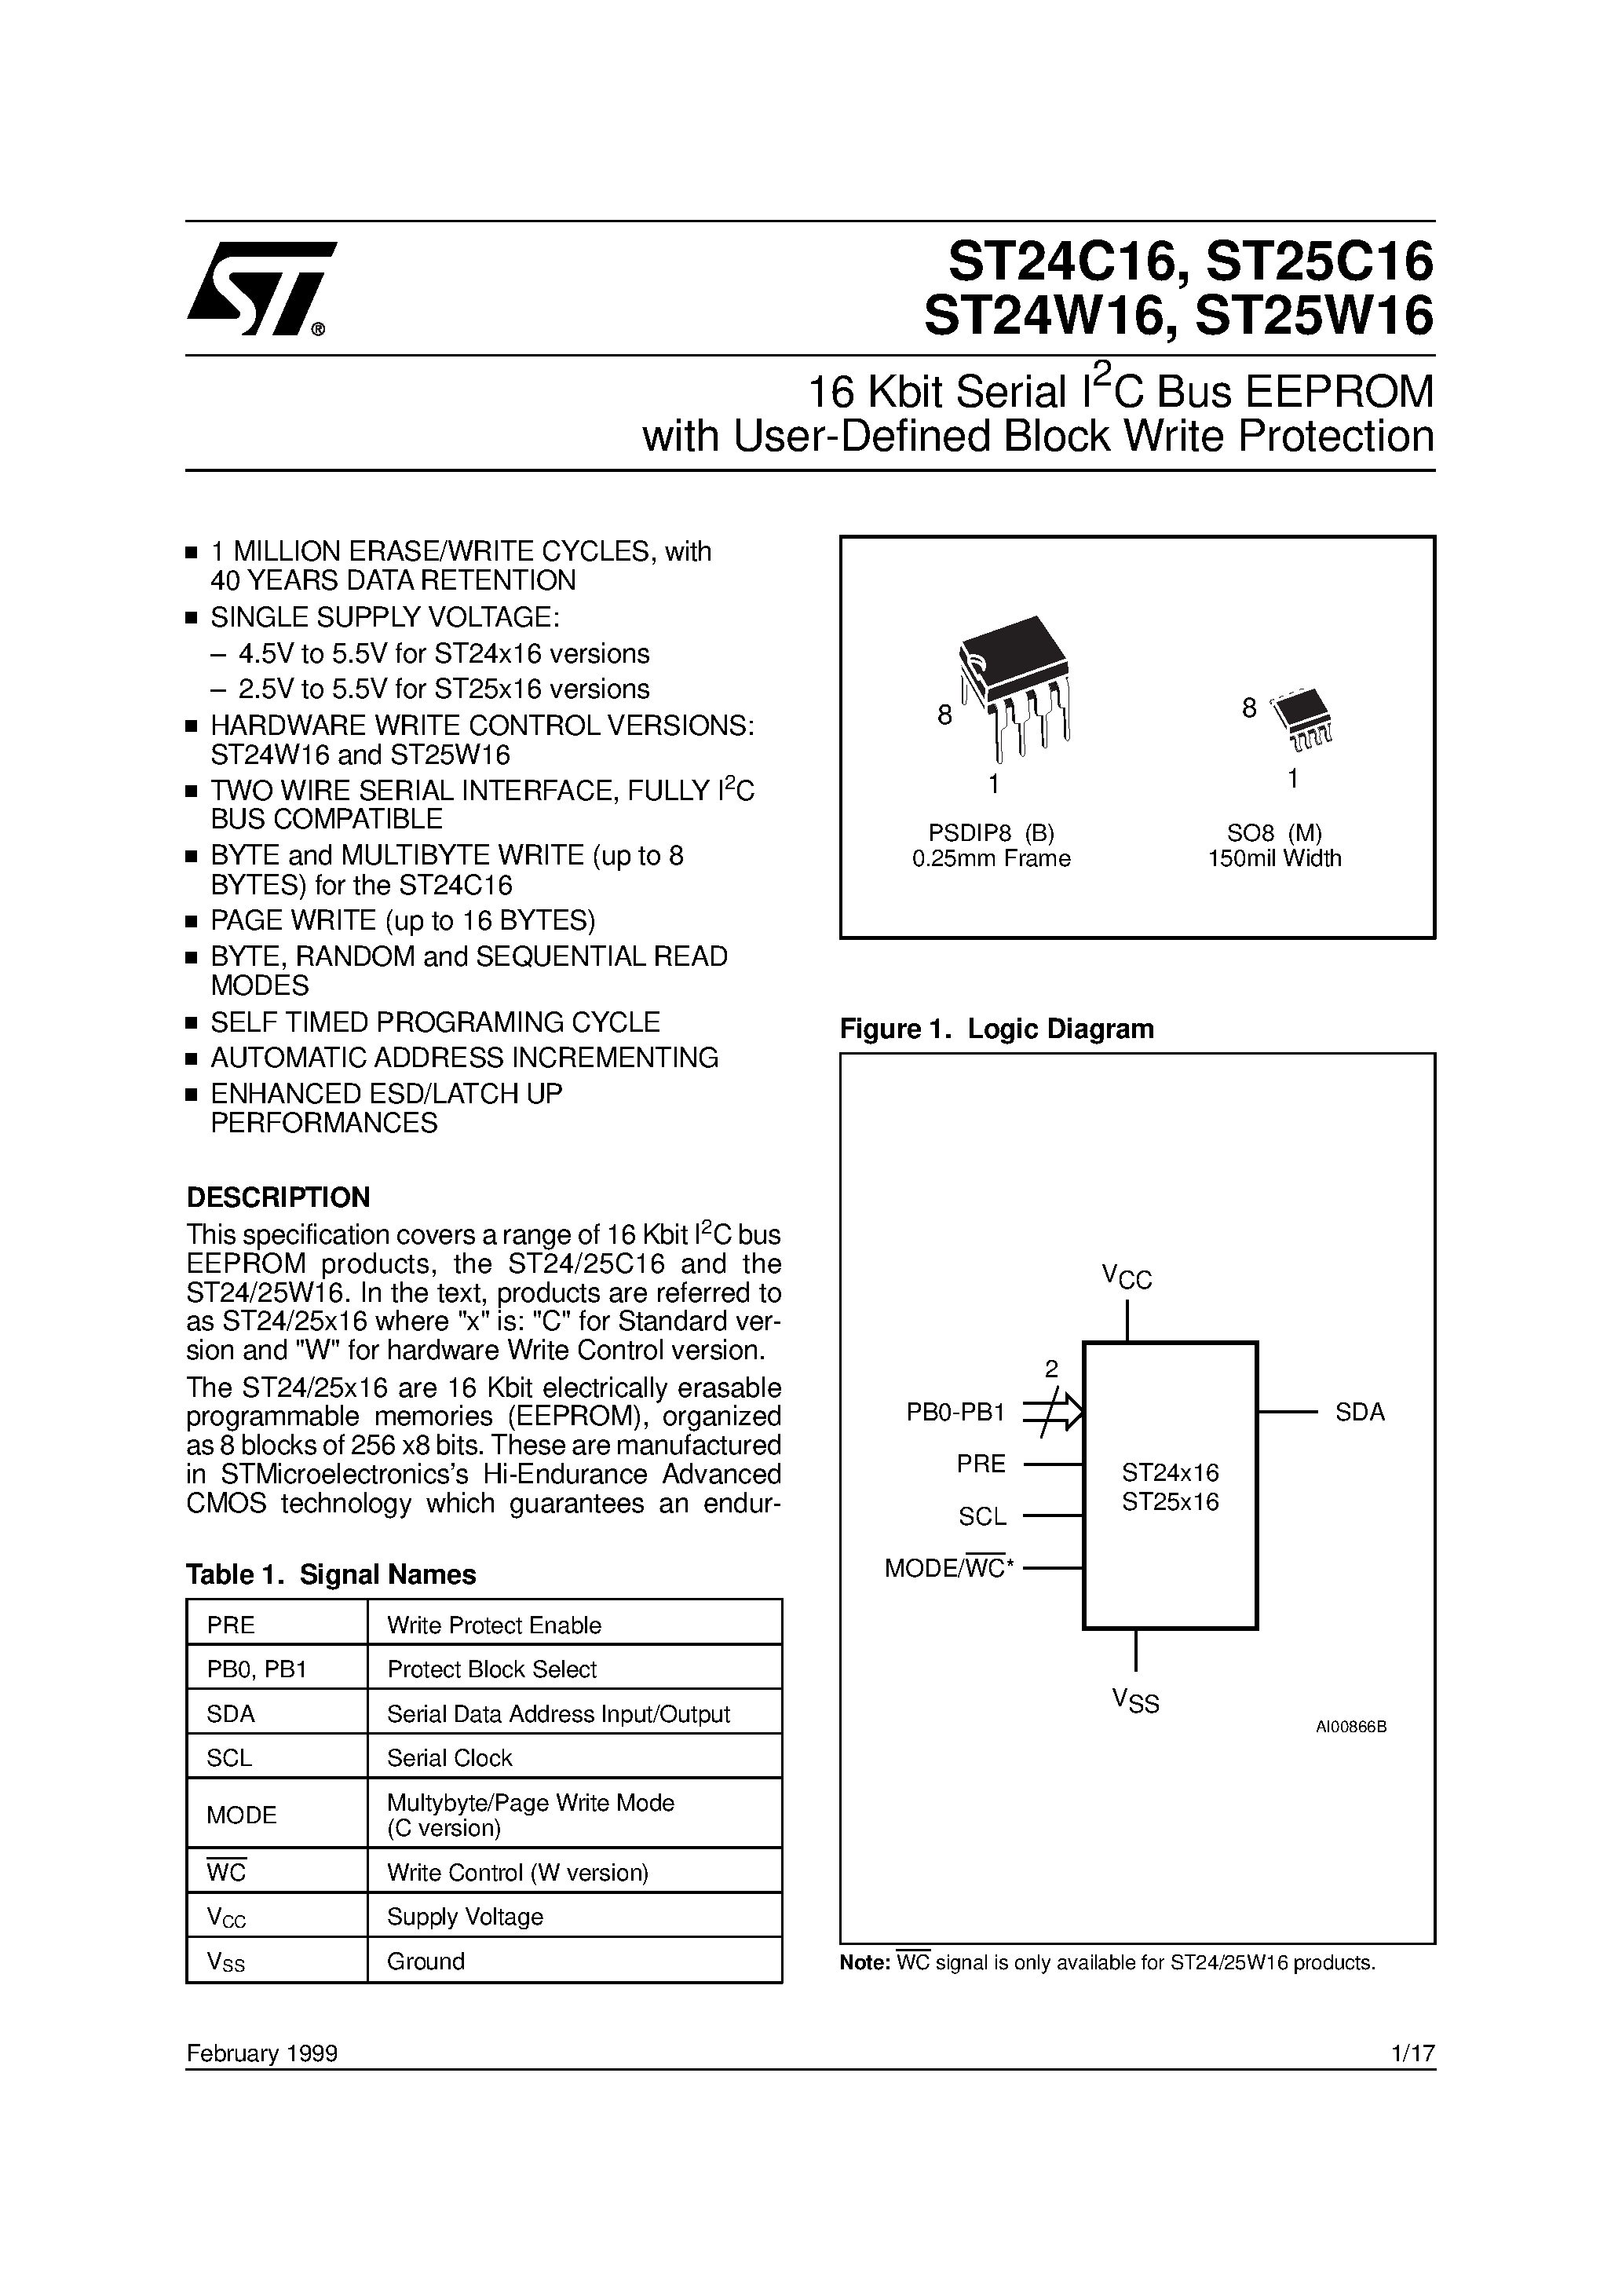 Datasheet ST24C16 - 16 Kbit Serial I2C Bus EEPROM with User-Defined Block Write Protection page 1